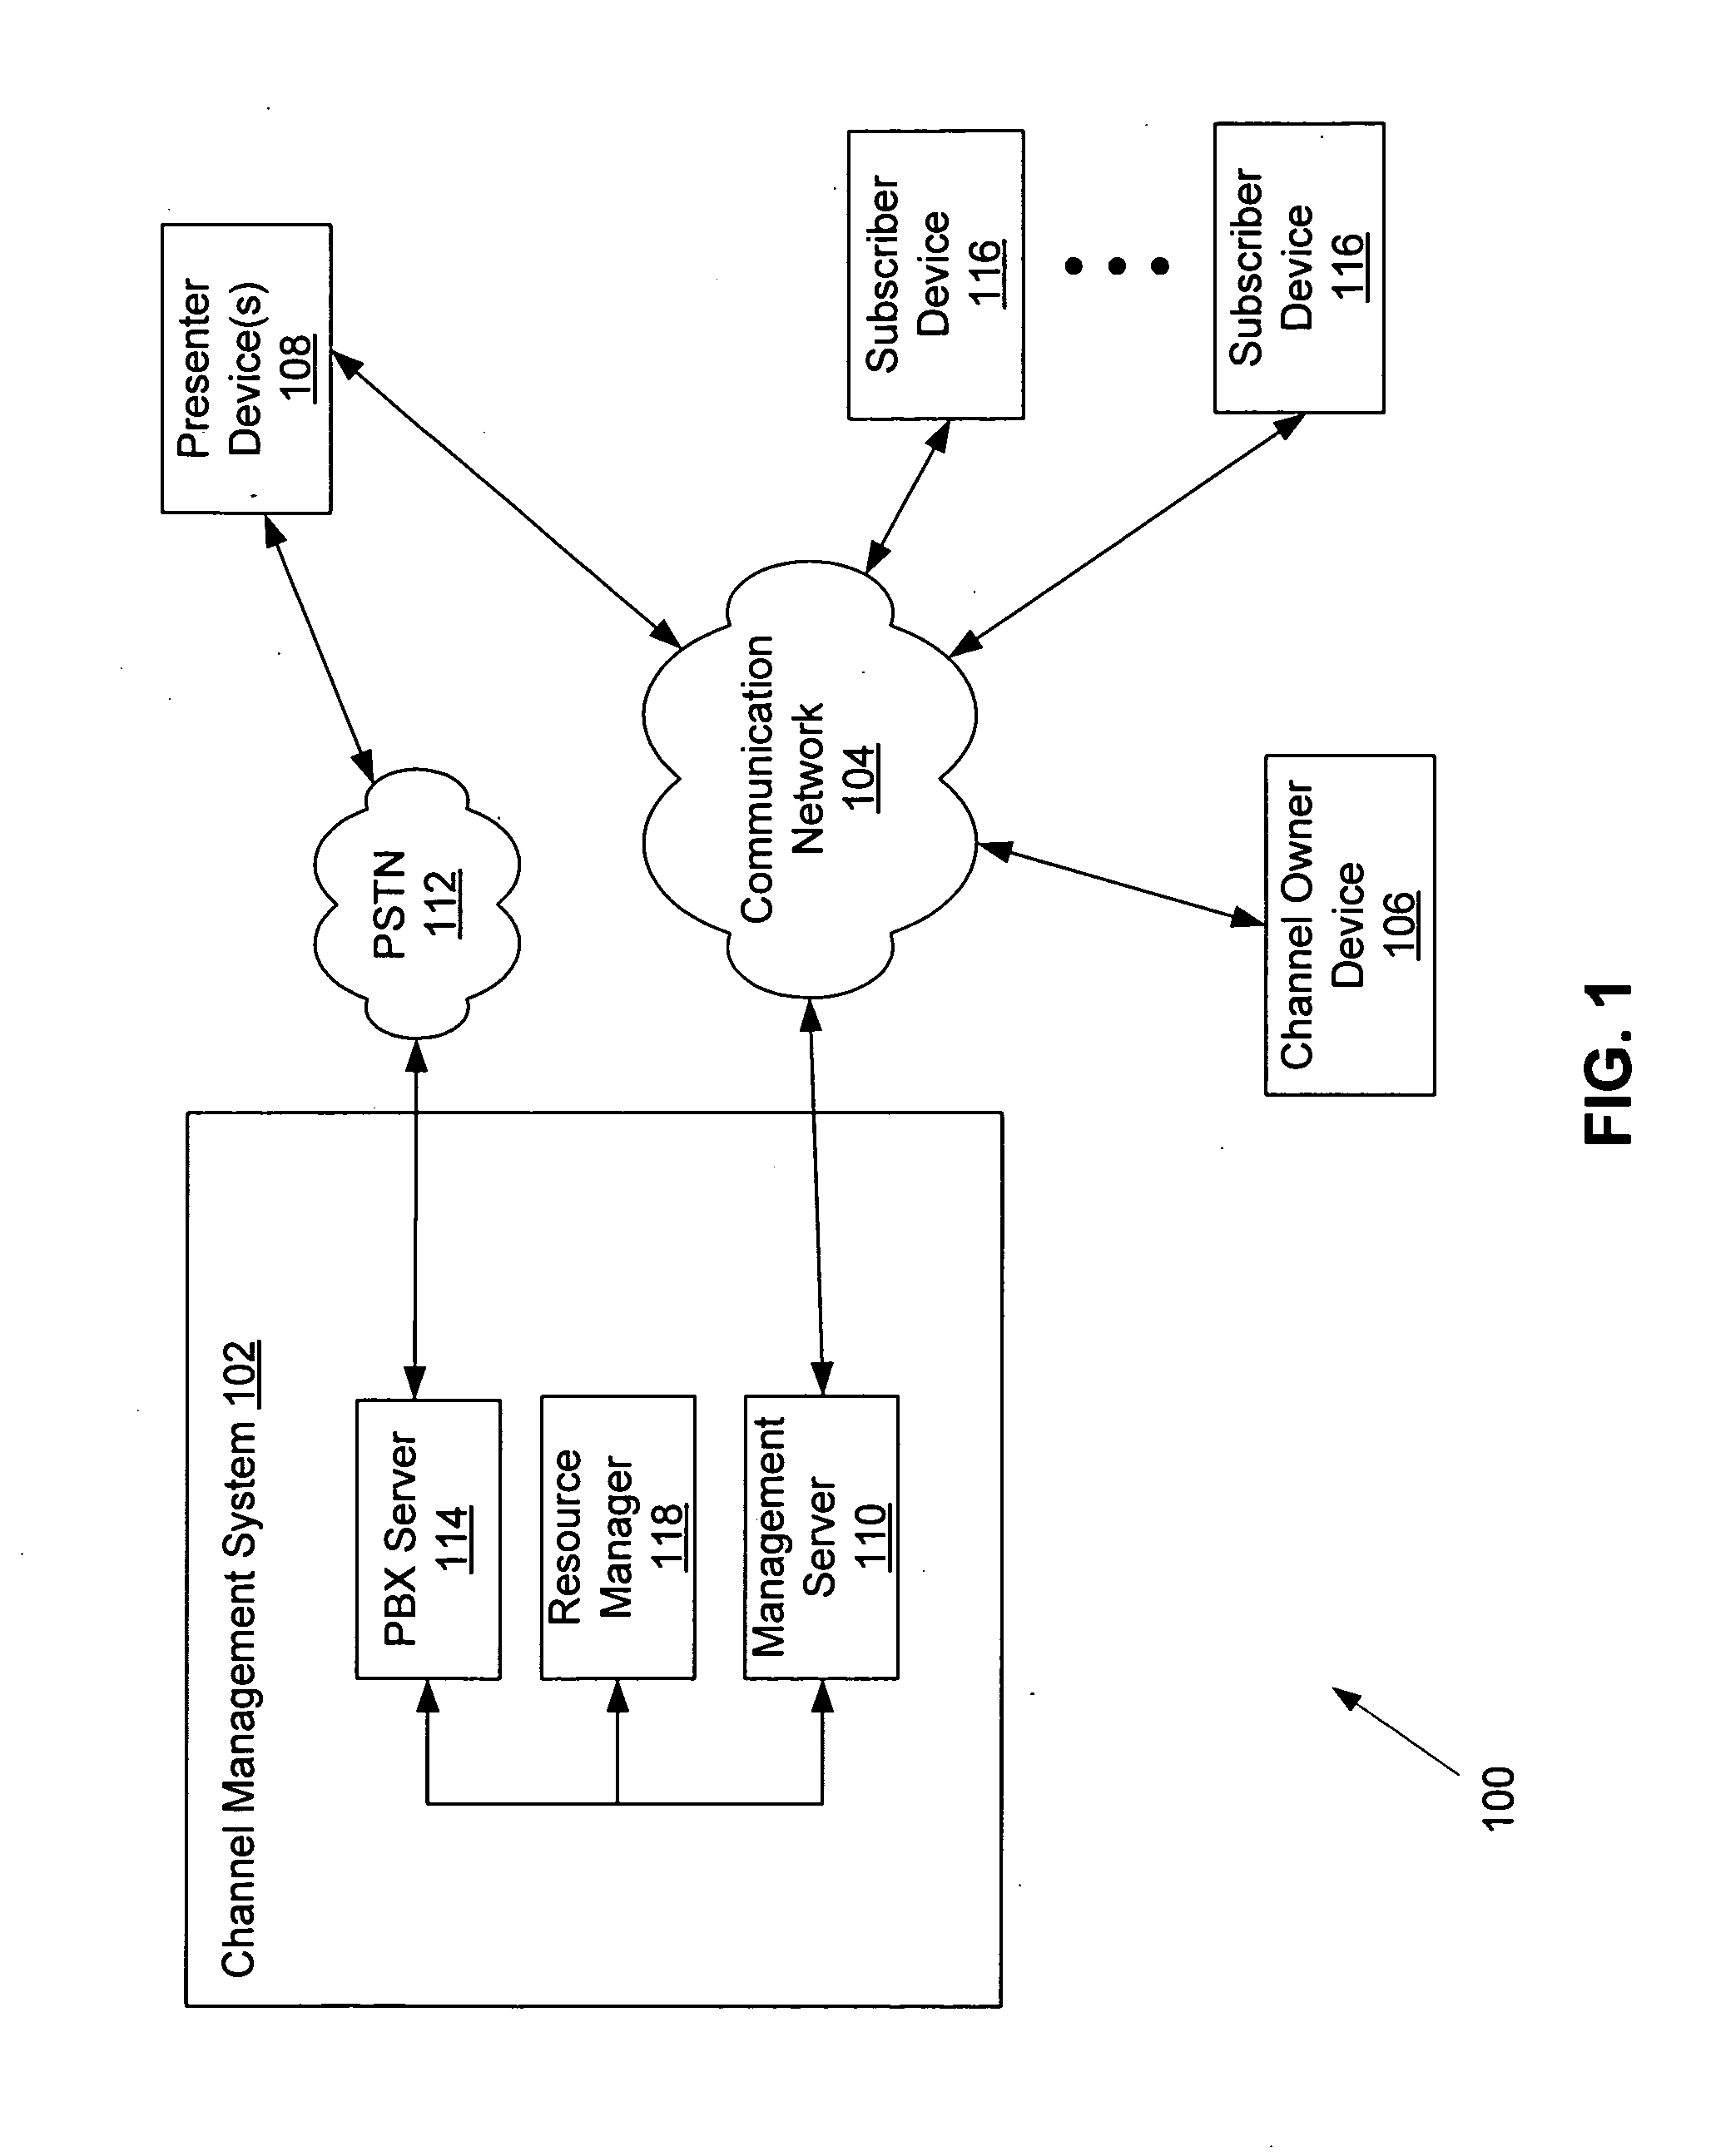 Systems and methods for integrating live audio communication in a live web event